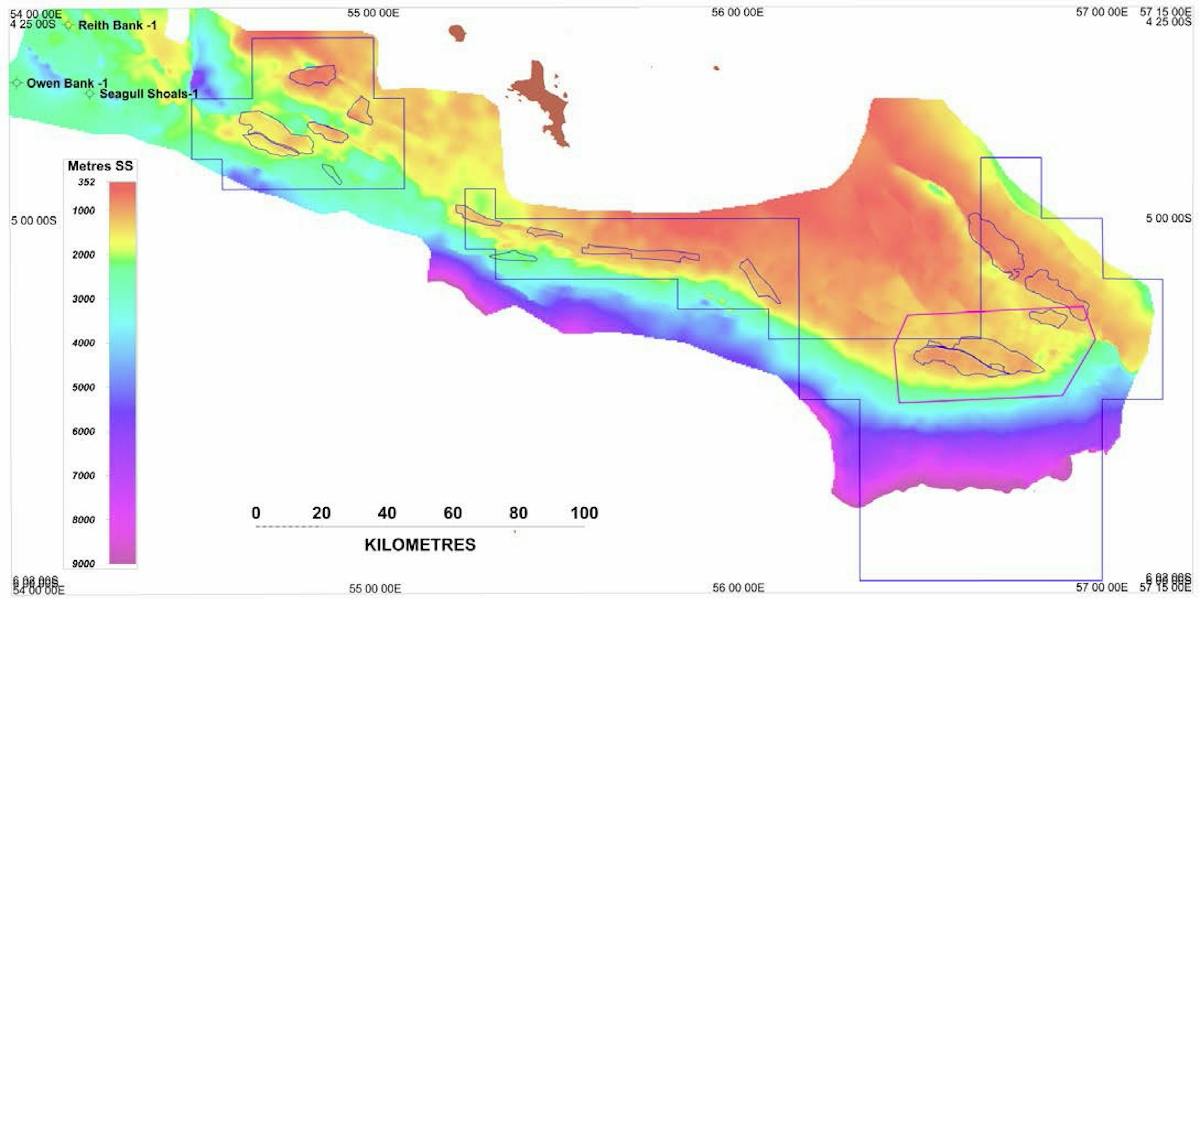 Dolphin to conduct 3D survey offshore Seychelles.